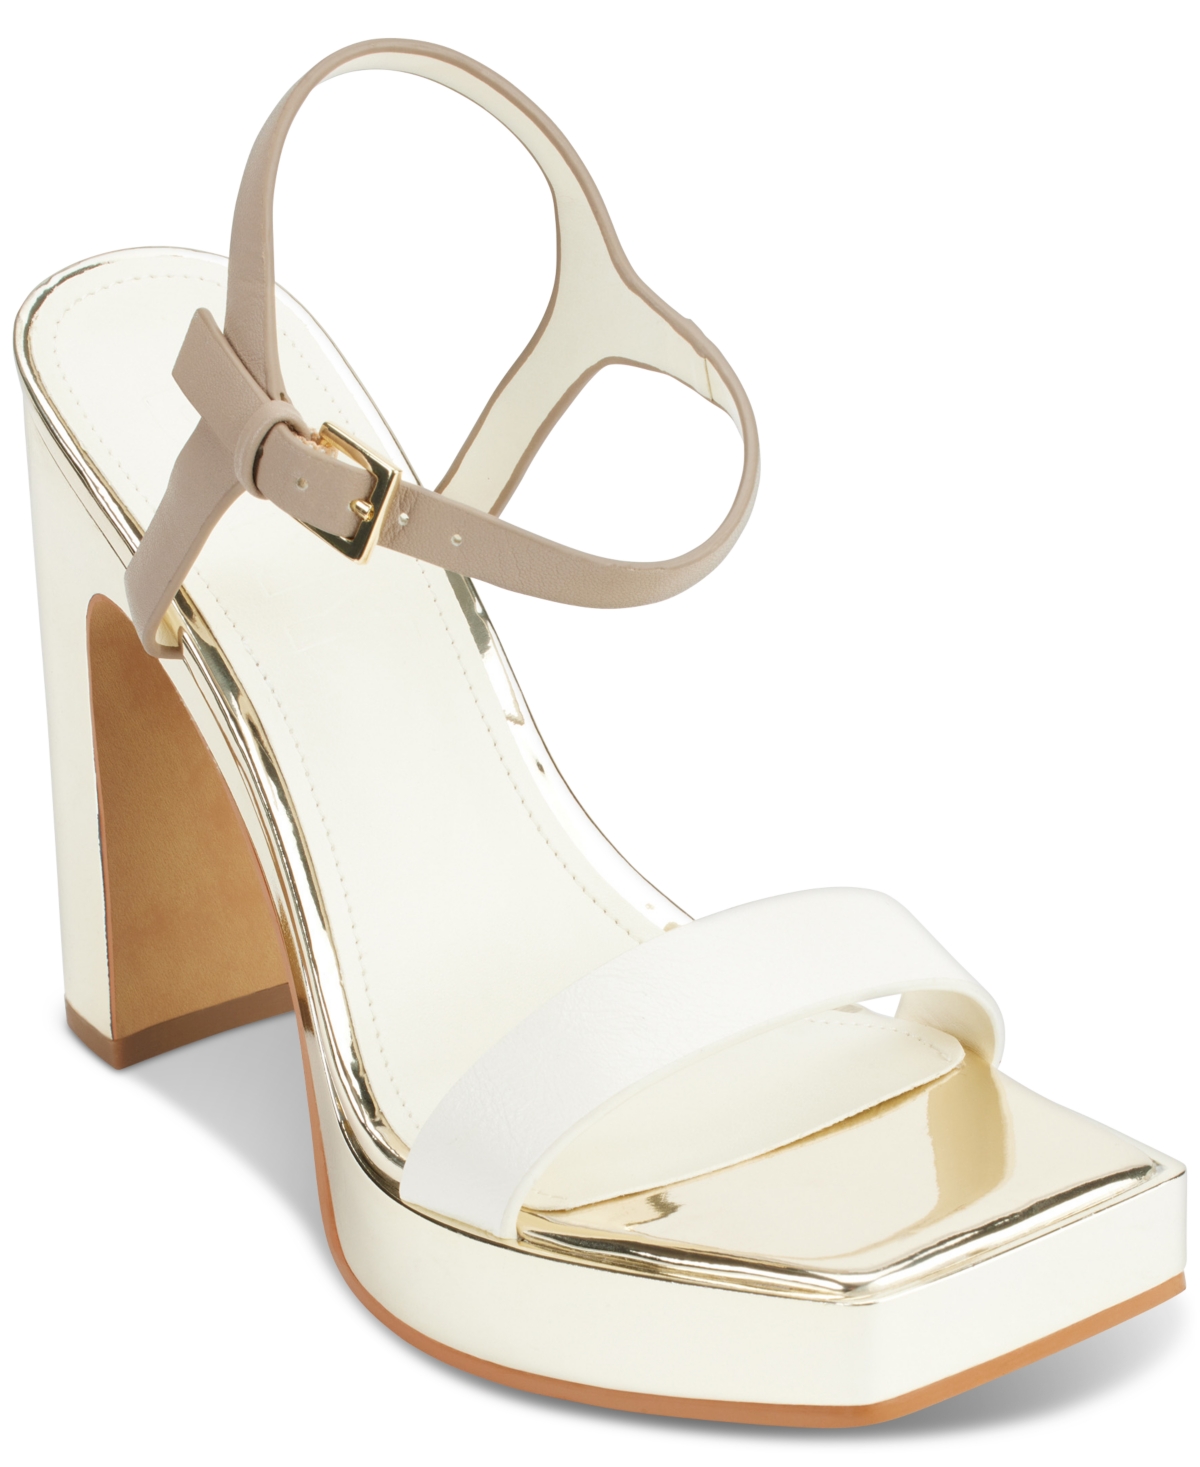 DKNY WOMEN'S MAIDEN ANKLE-STRAP SANDALS